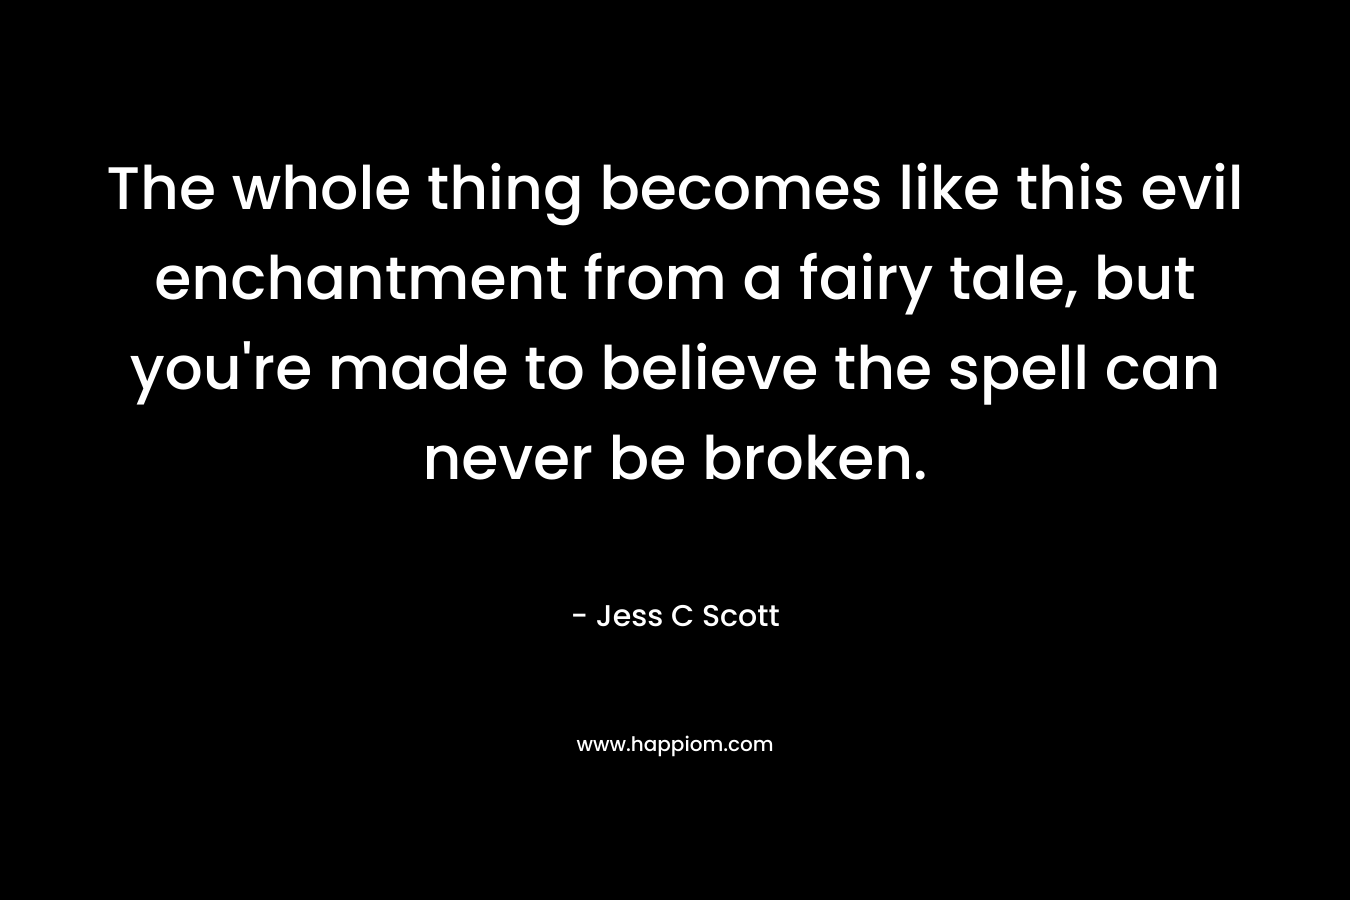 The whole thing becomes like this evil enchantment from a fairy tale, but you’re made to believe the spell can never be broken. – Jess C Scott